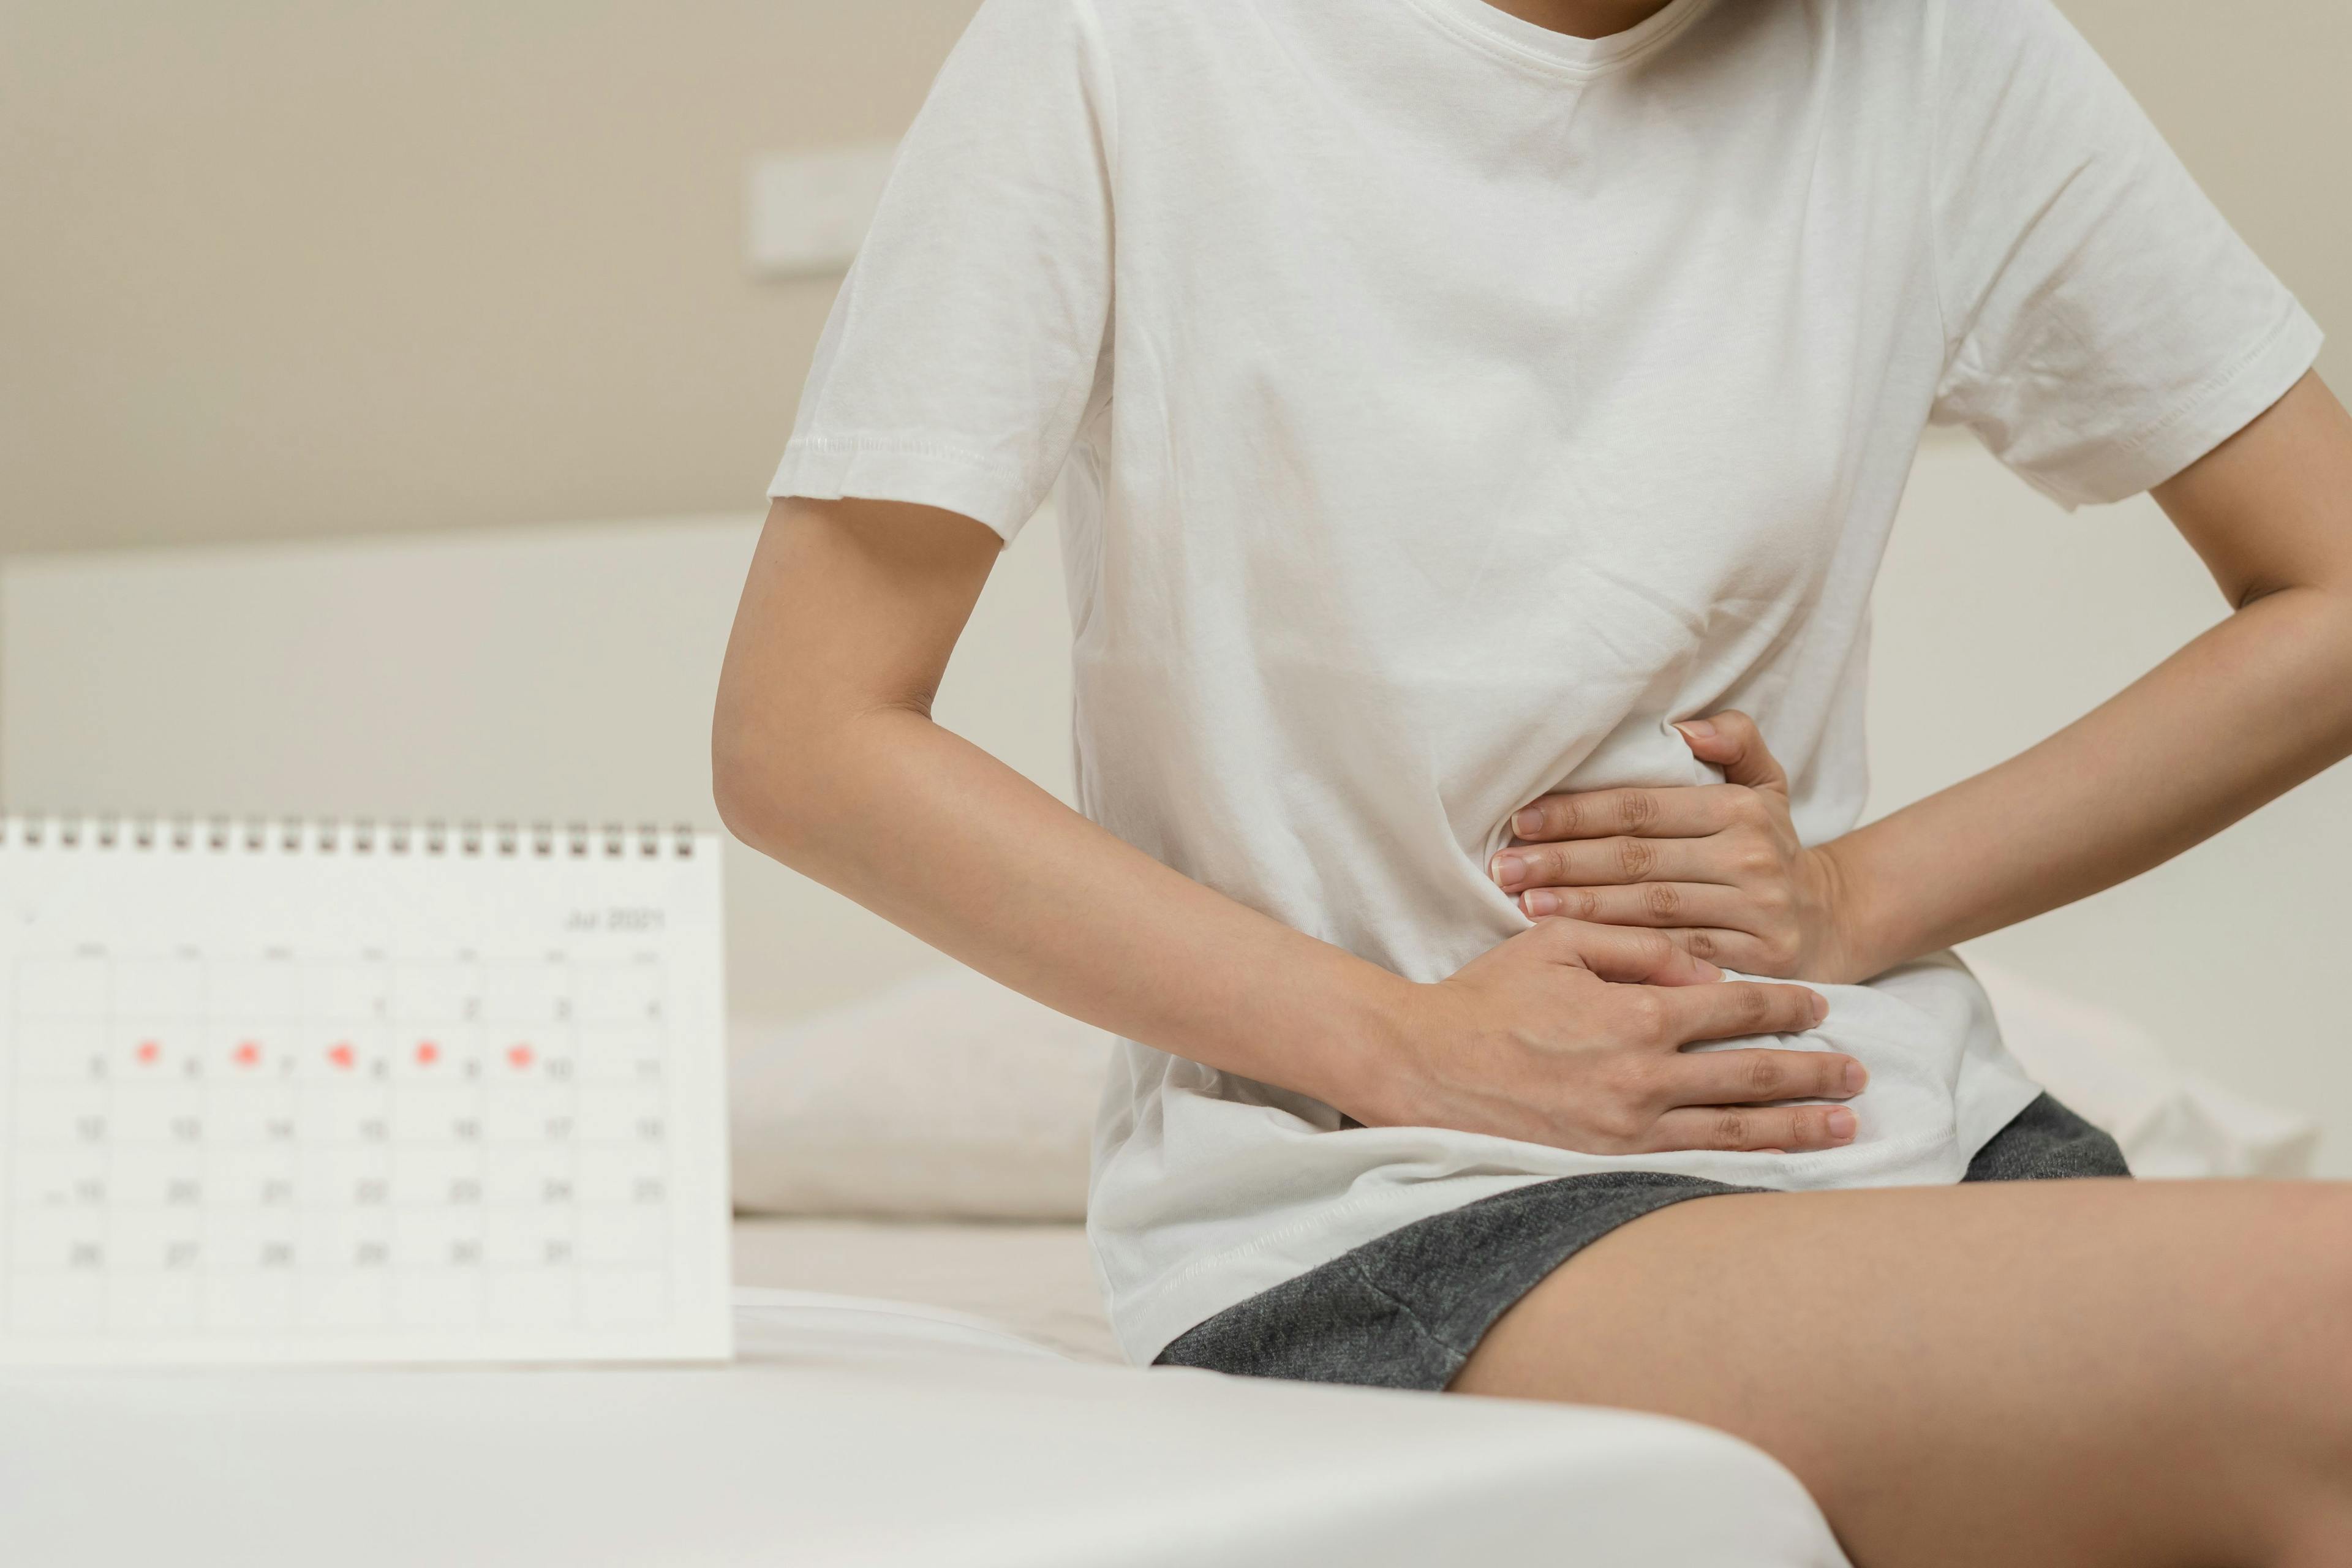  Diagnosing and treating the adolescent with irregular menstruation